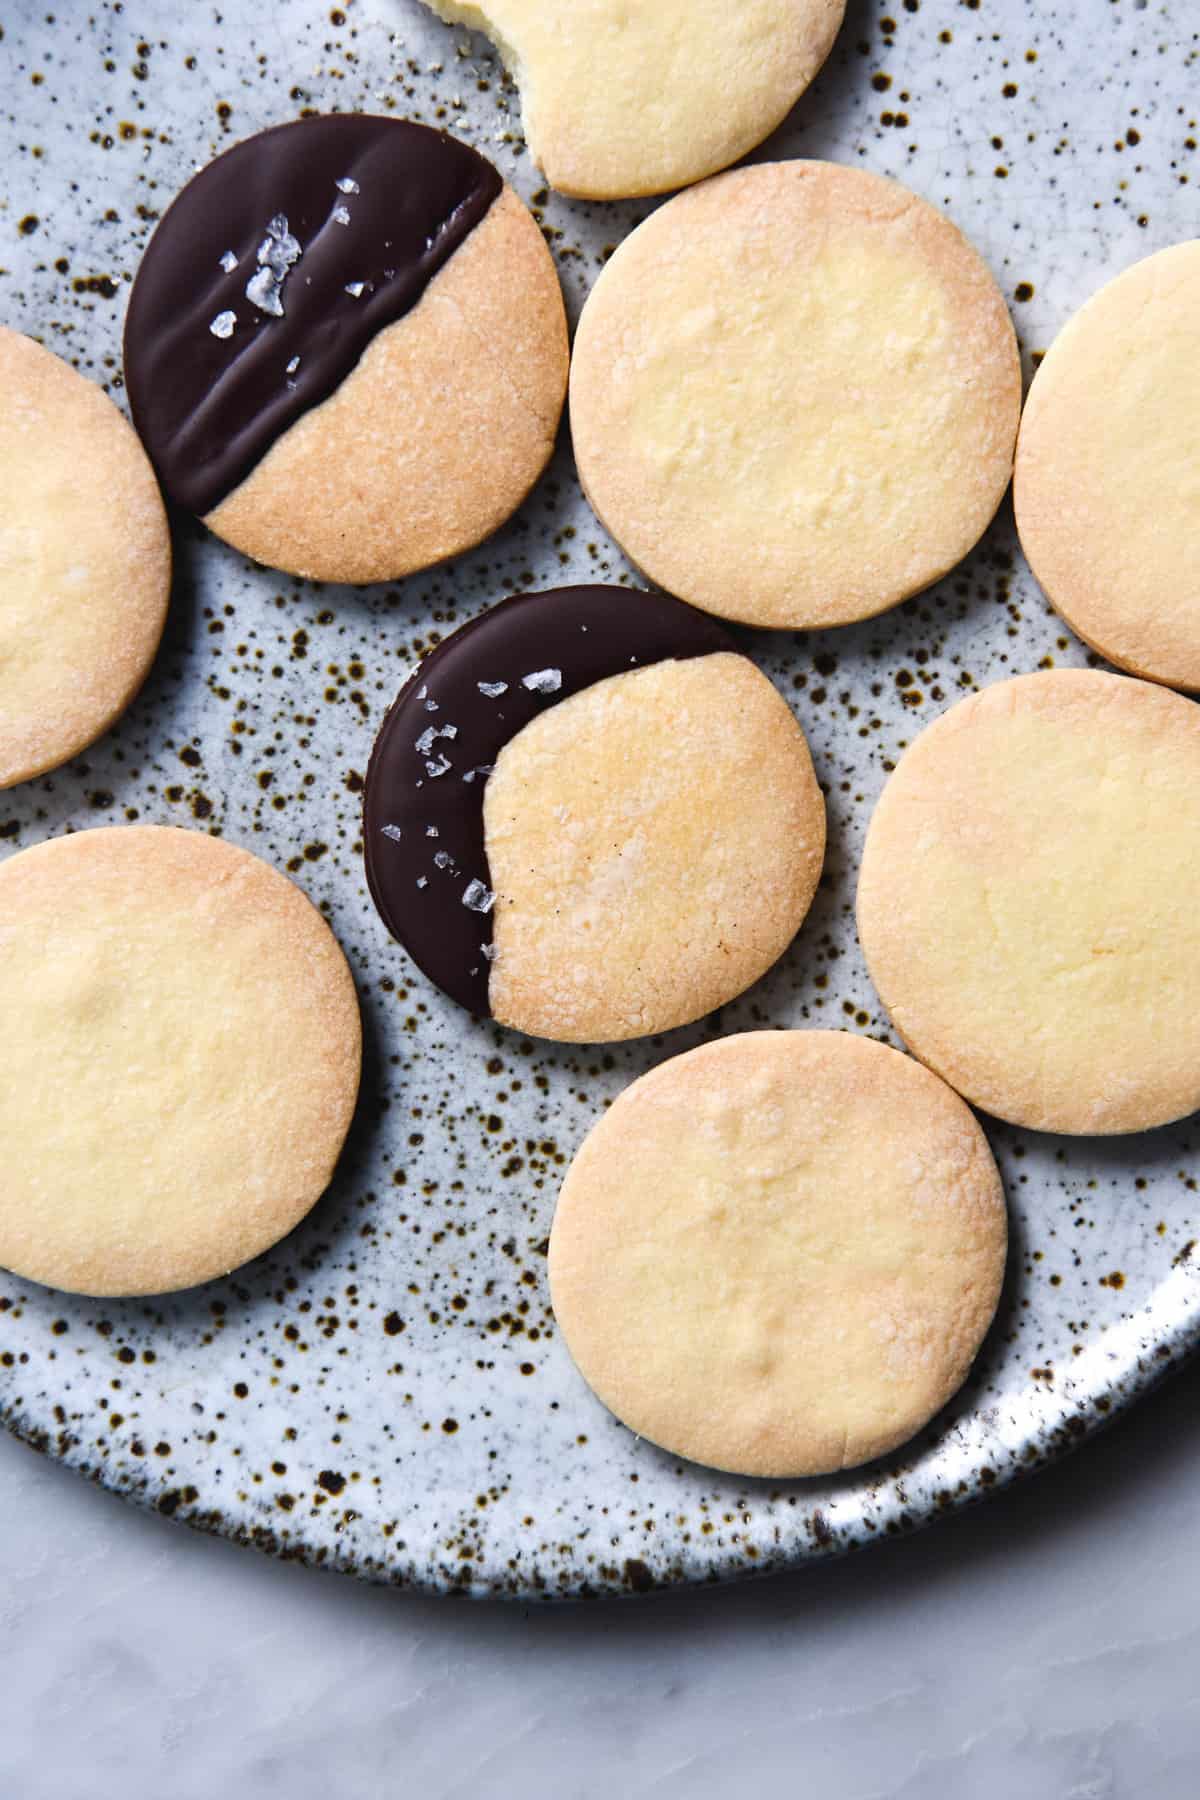 An aerial close up image of gluten free shortbreads on a white speckled ceramic plate. Two of the shortbreads have been dipped in chocolate and sprinkled with sea salt flakes.